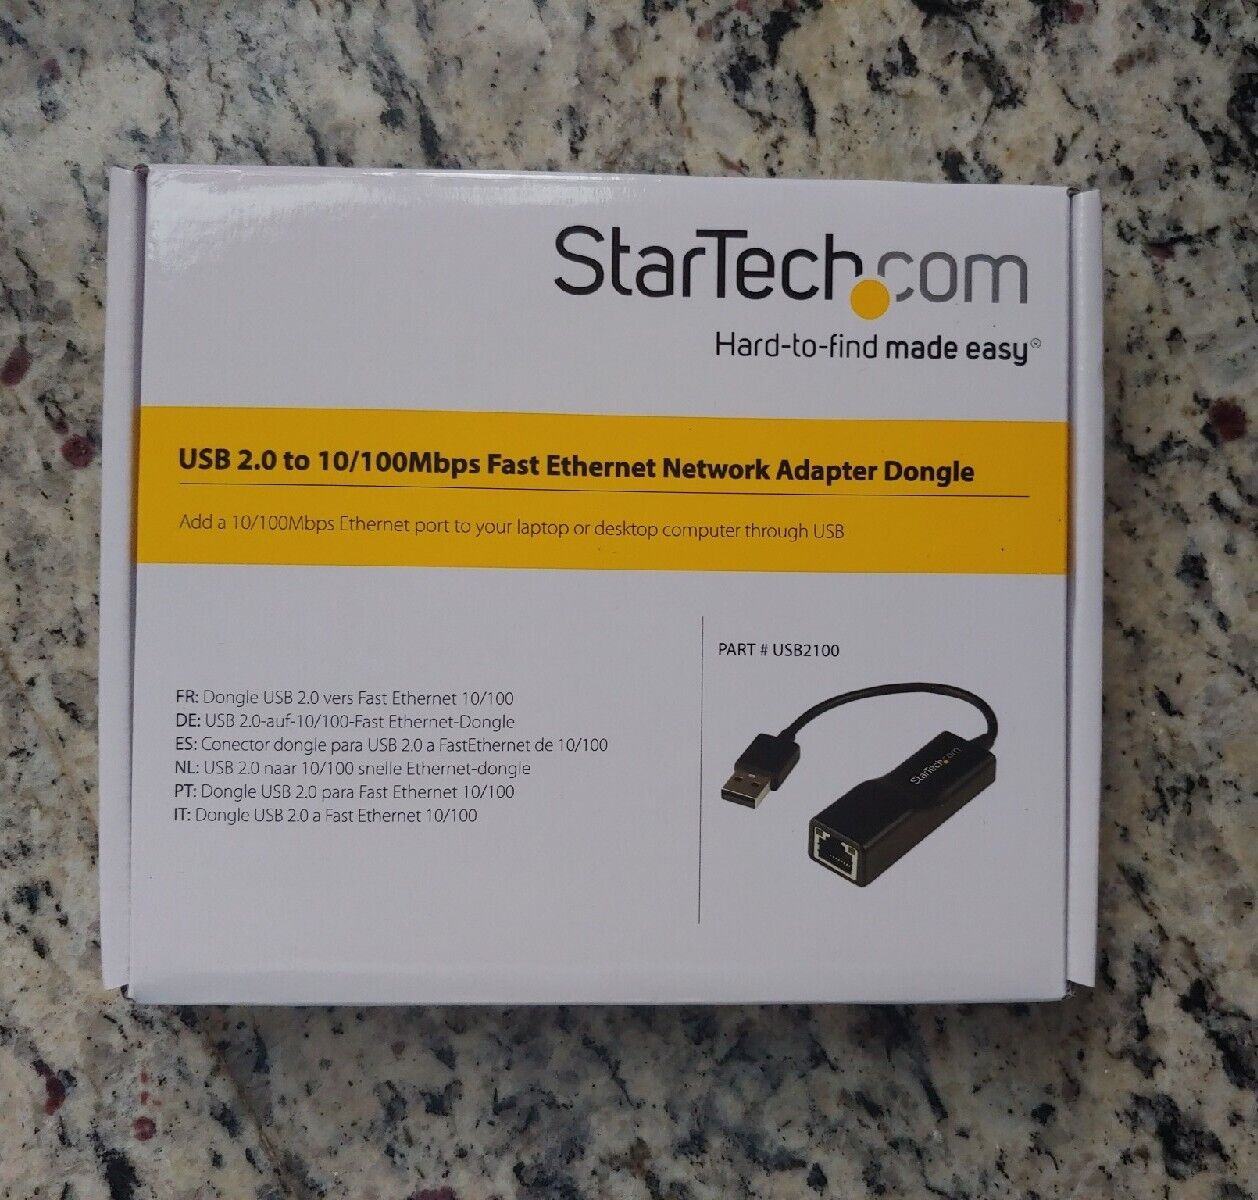 Usb 2.0 To 10/100 Mbps Ethernet Network Adapter Startech.com- NEW